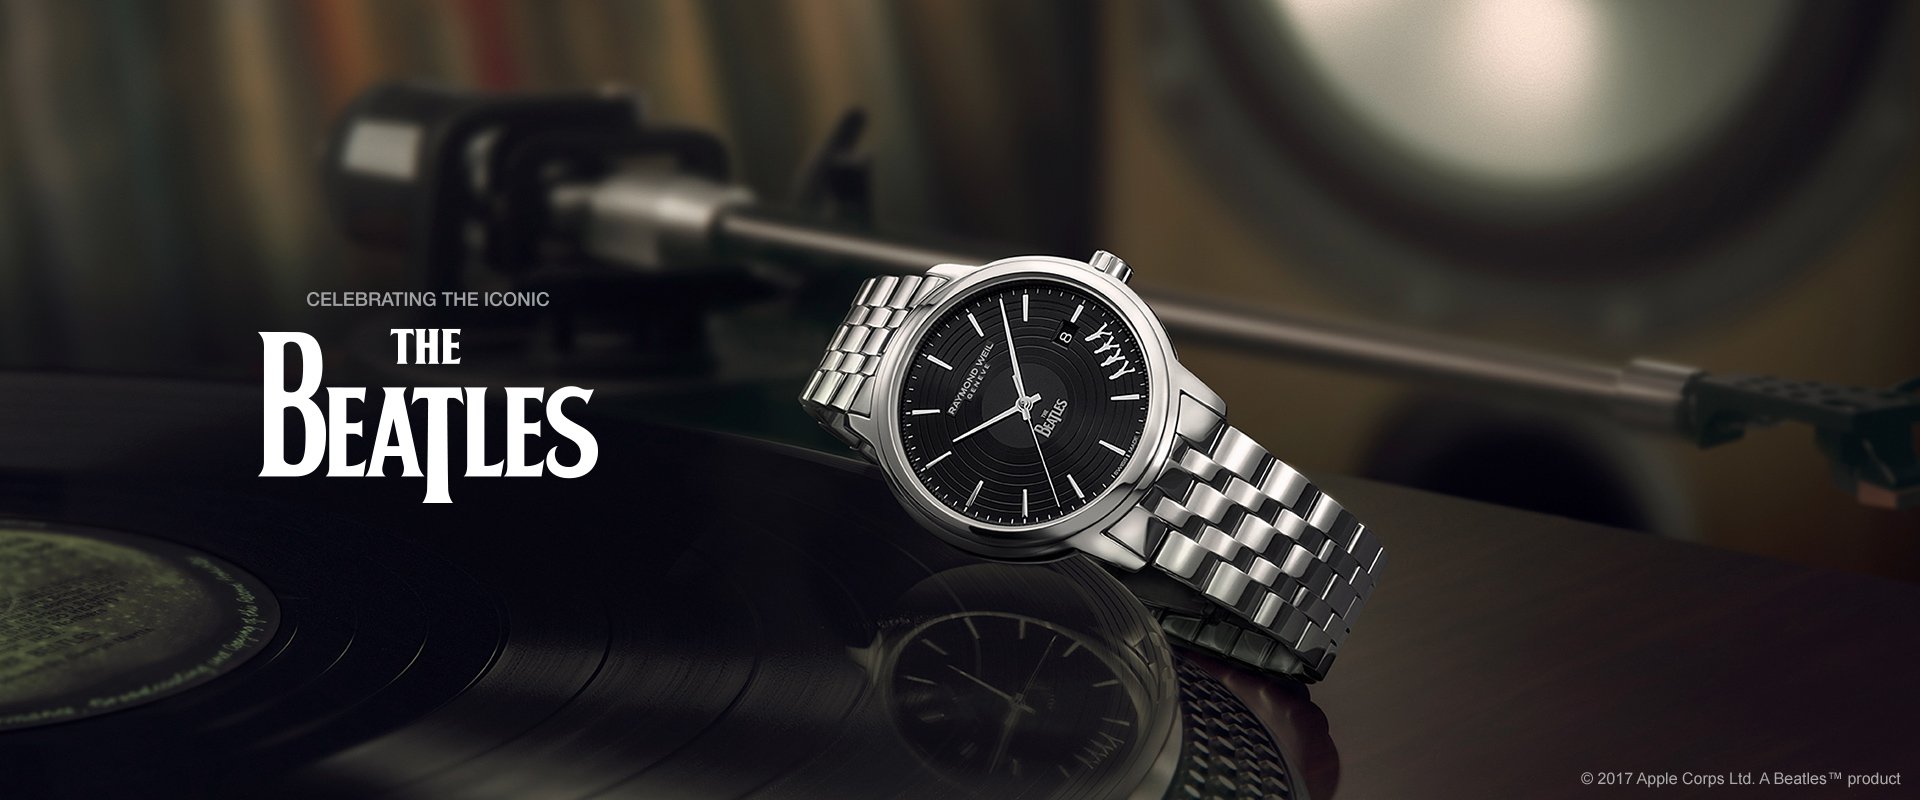 RAYMOND WEIL - Limited edition timepieces PRE-ORDER